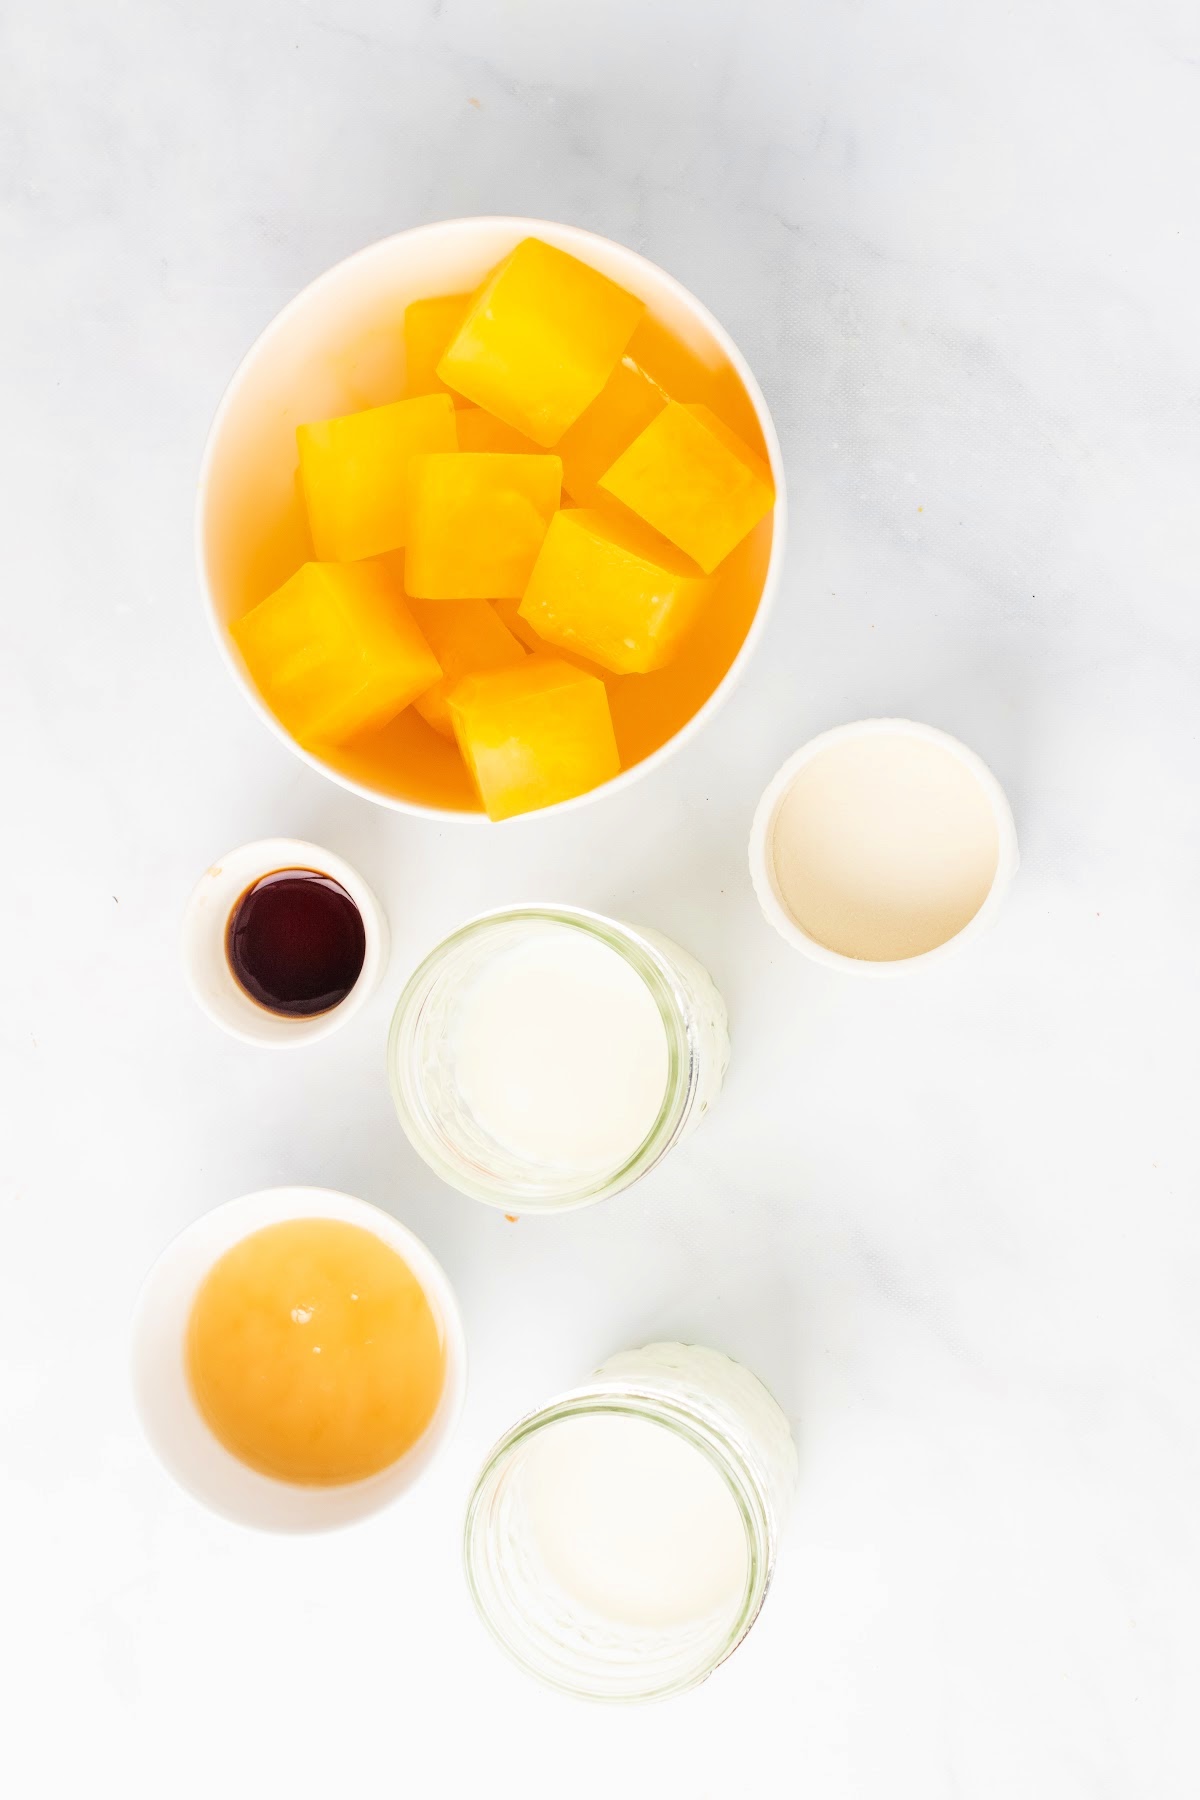 Bowl full of frozen orange juice ice cubes, small bowl with honey, small bowl with vanilla extract, small glass jar with milk, small glass jar with cream and small bowl with hydrolyzed collagen.